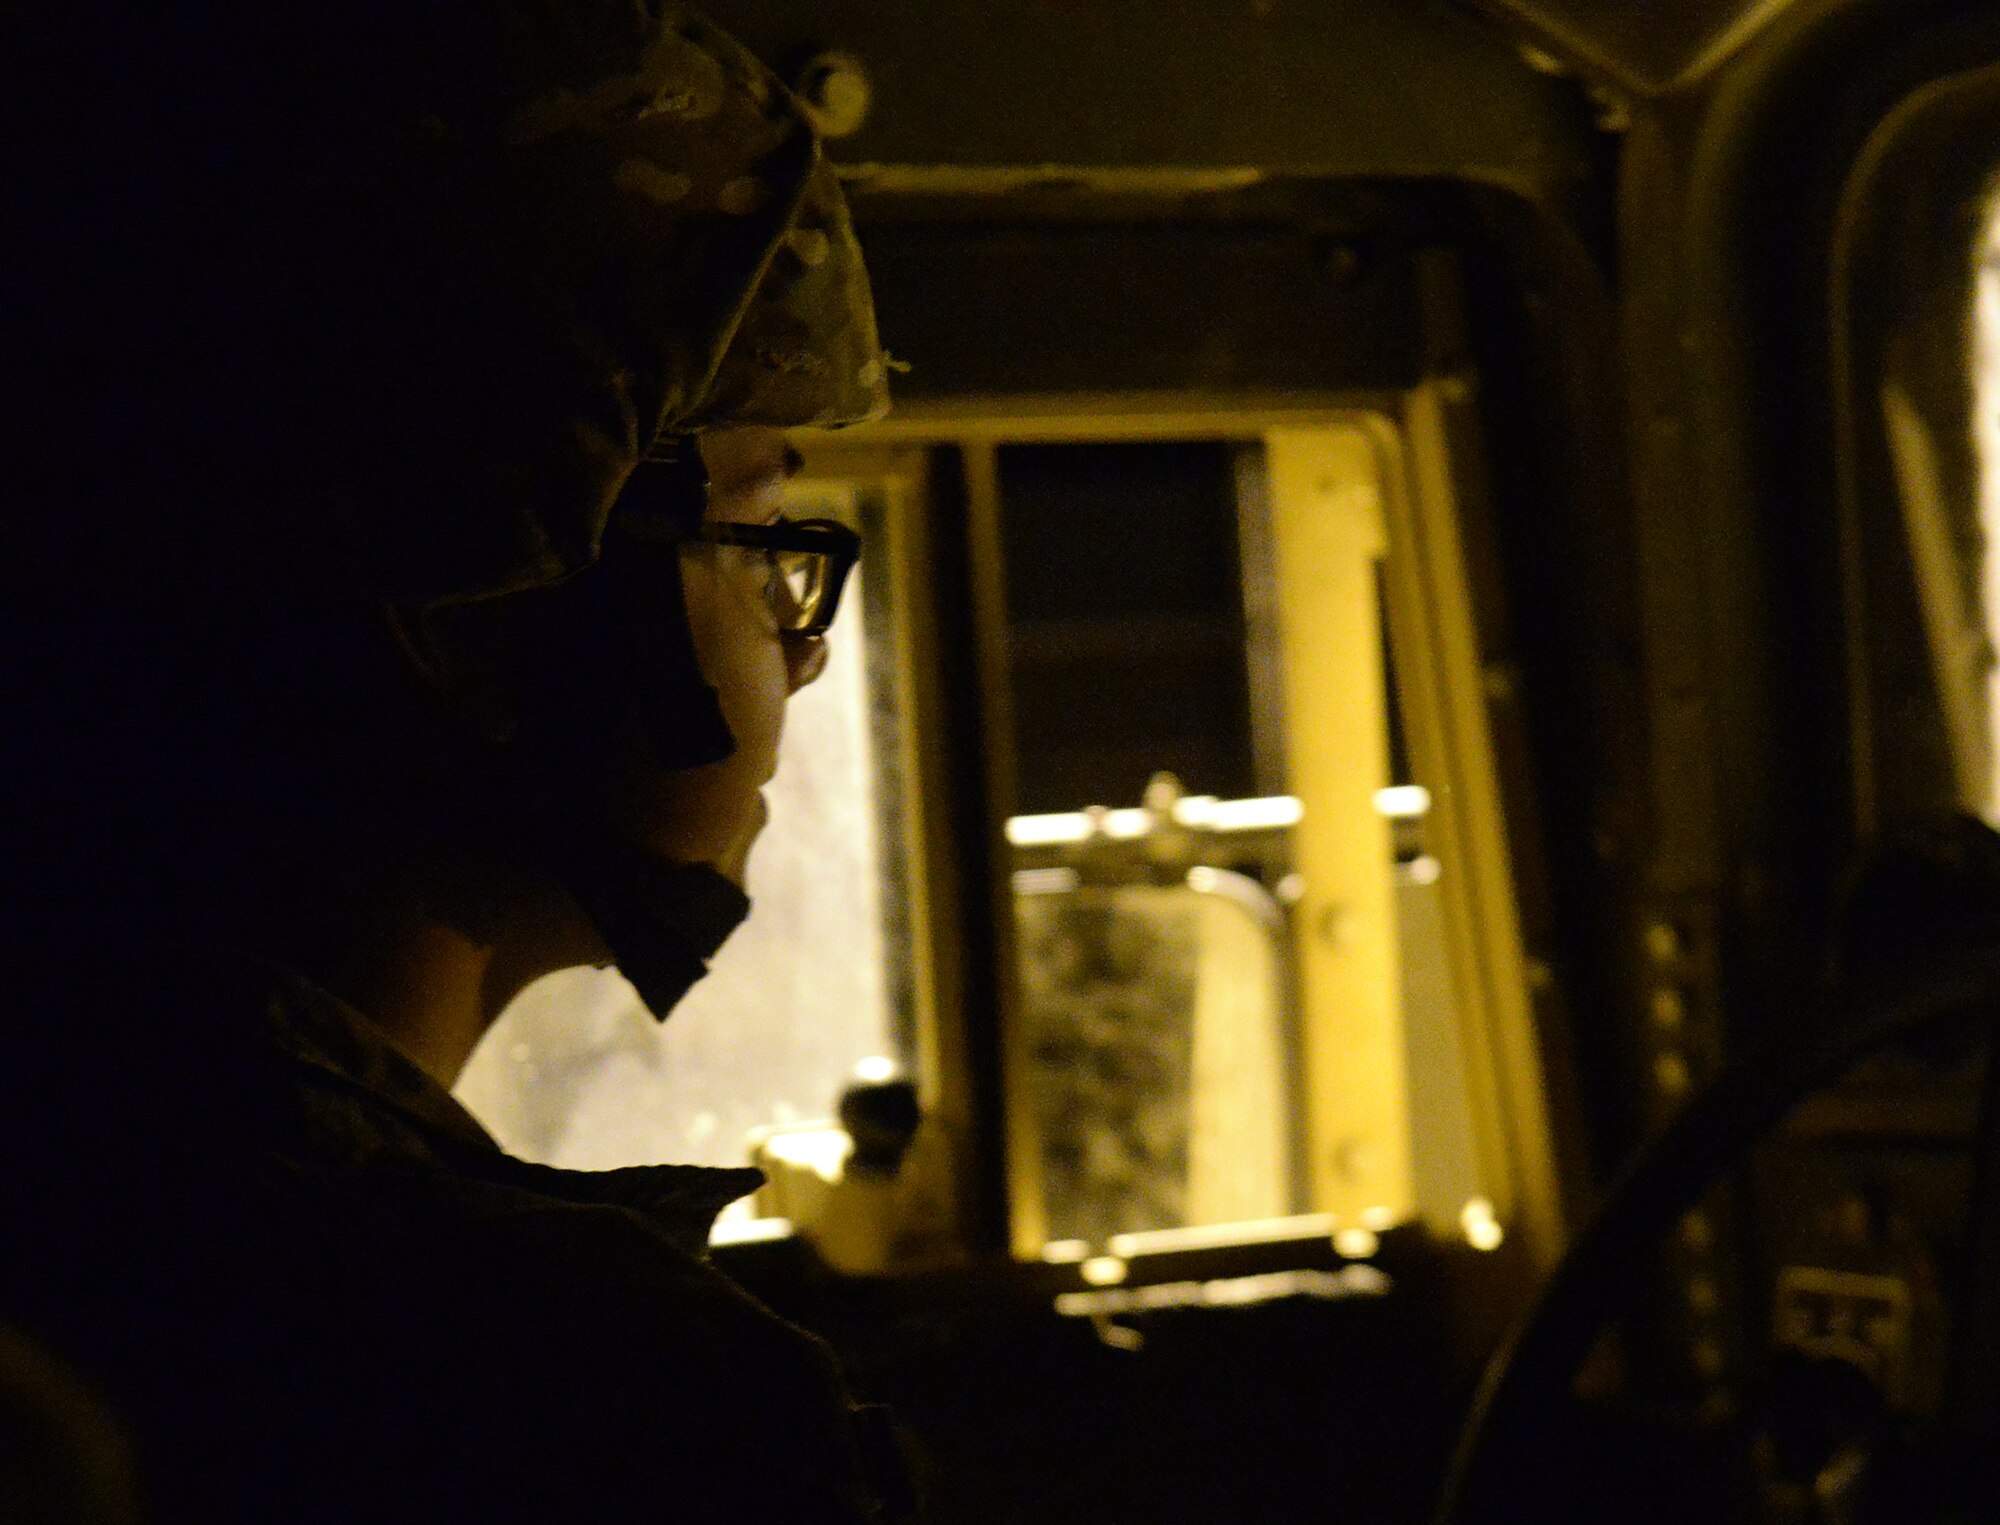 A 790th Missile Security Forces Squadron Airman drives a Humvee through a missile alert facility front gate at approximately 11 p.m. Aug. 20, 2015. Missile cops perform security checks of launch facilities day and night to ensure a safe and secure missile field. (U.S. Air Force photo by Airman 1st Class Brandon Valle)